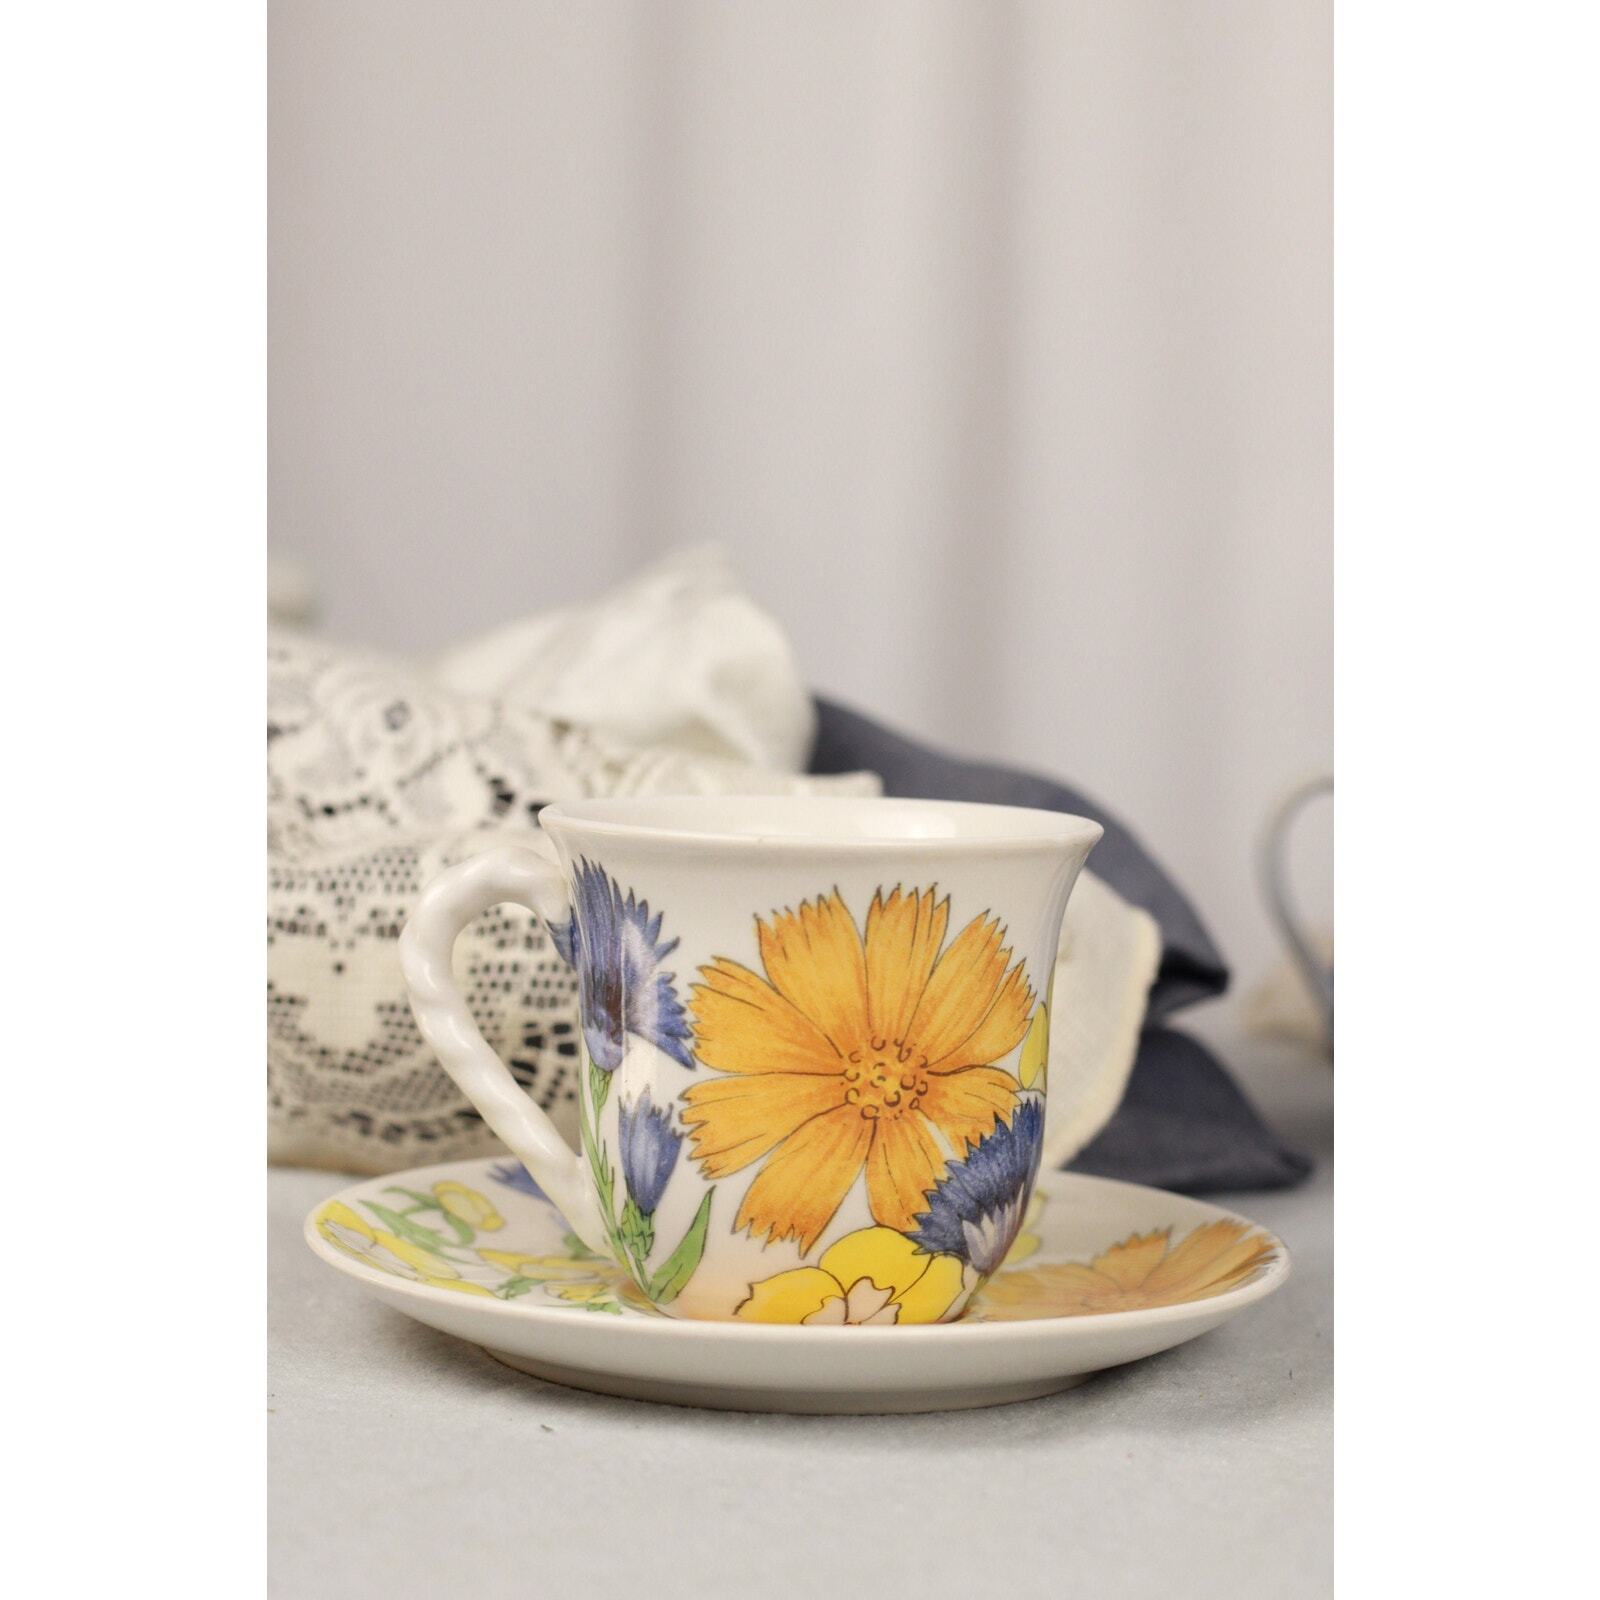 Ernistene Salerno Hand painted Italian Coffe Cup Cup and Saucer